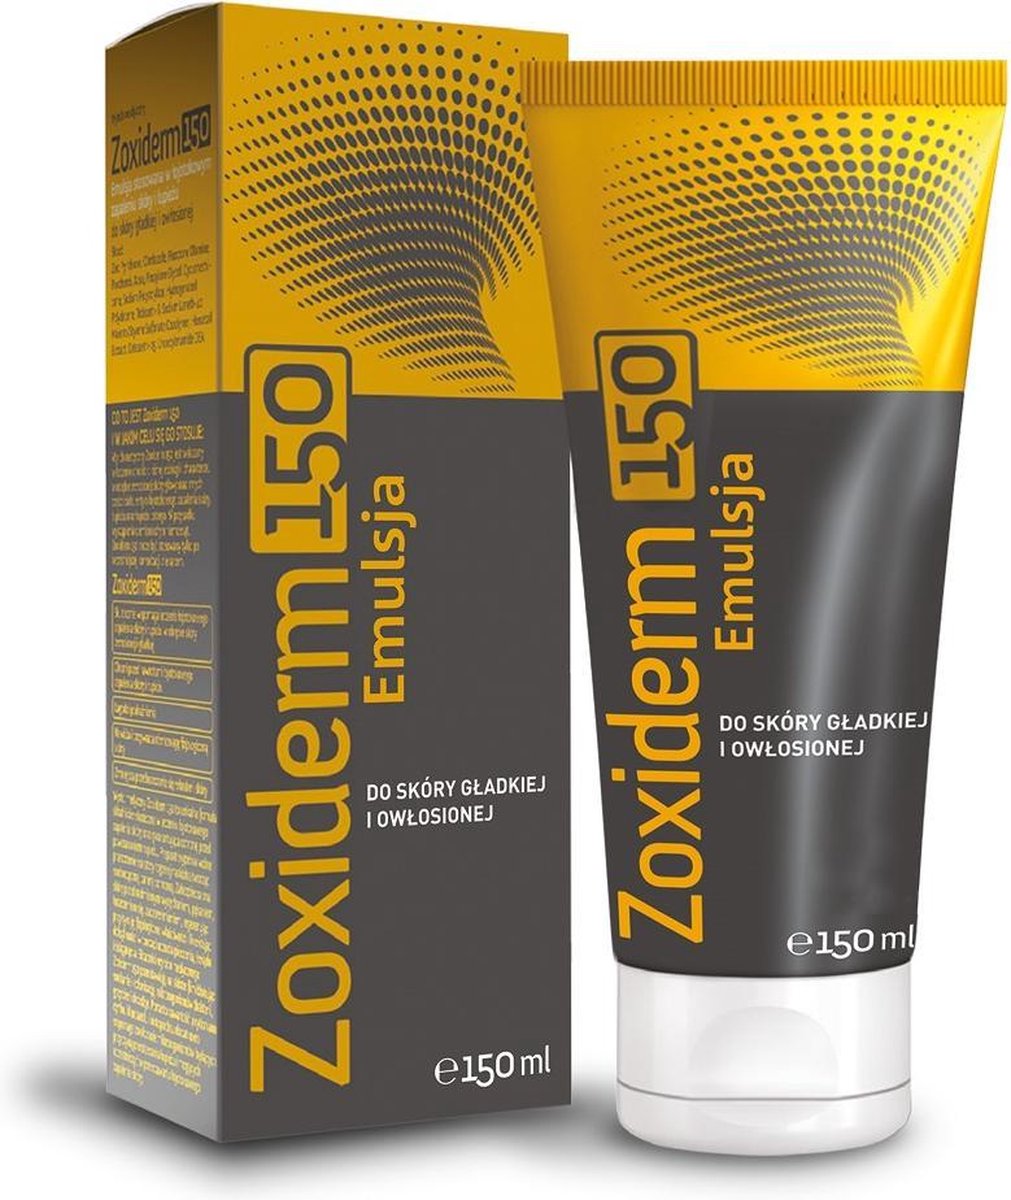 Zoxiderm - Anti-Dandr Silly Emulsion Is A Score Of Smooth And Hairy 150